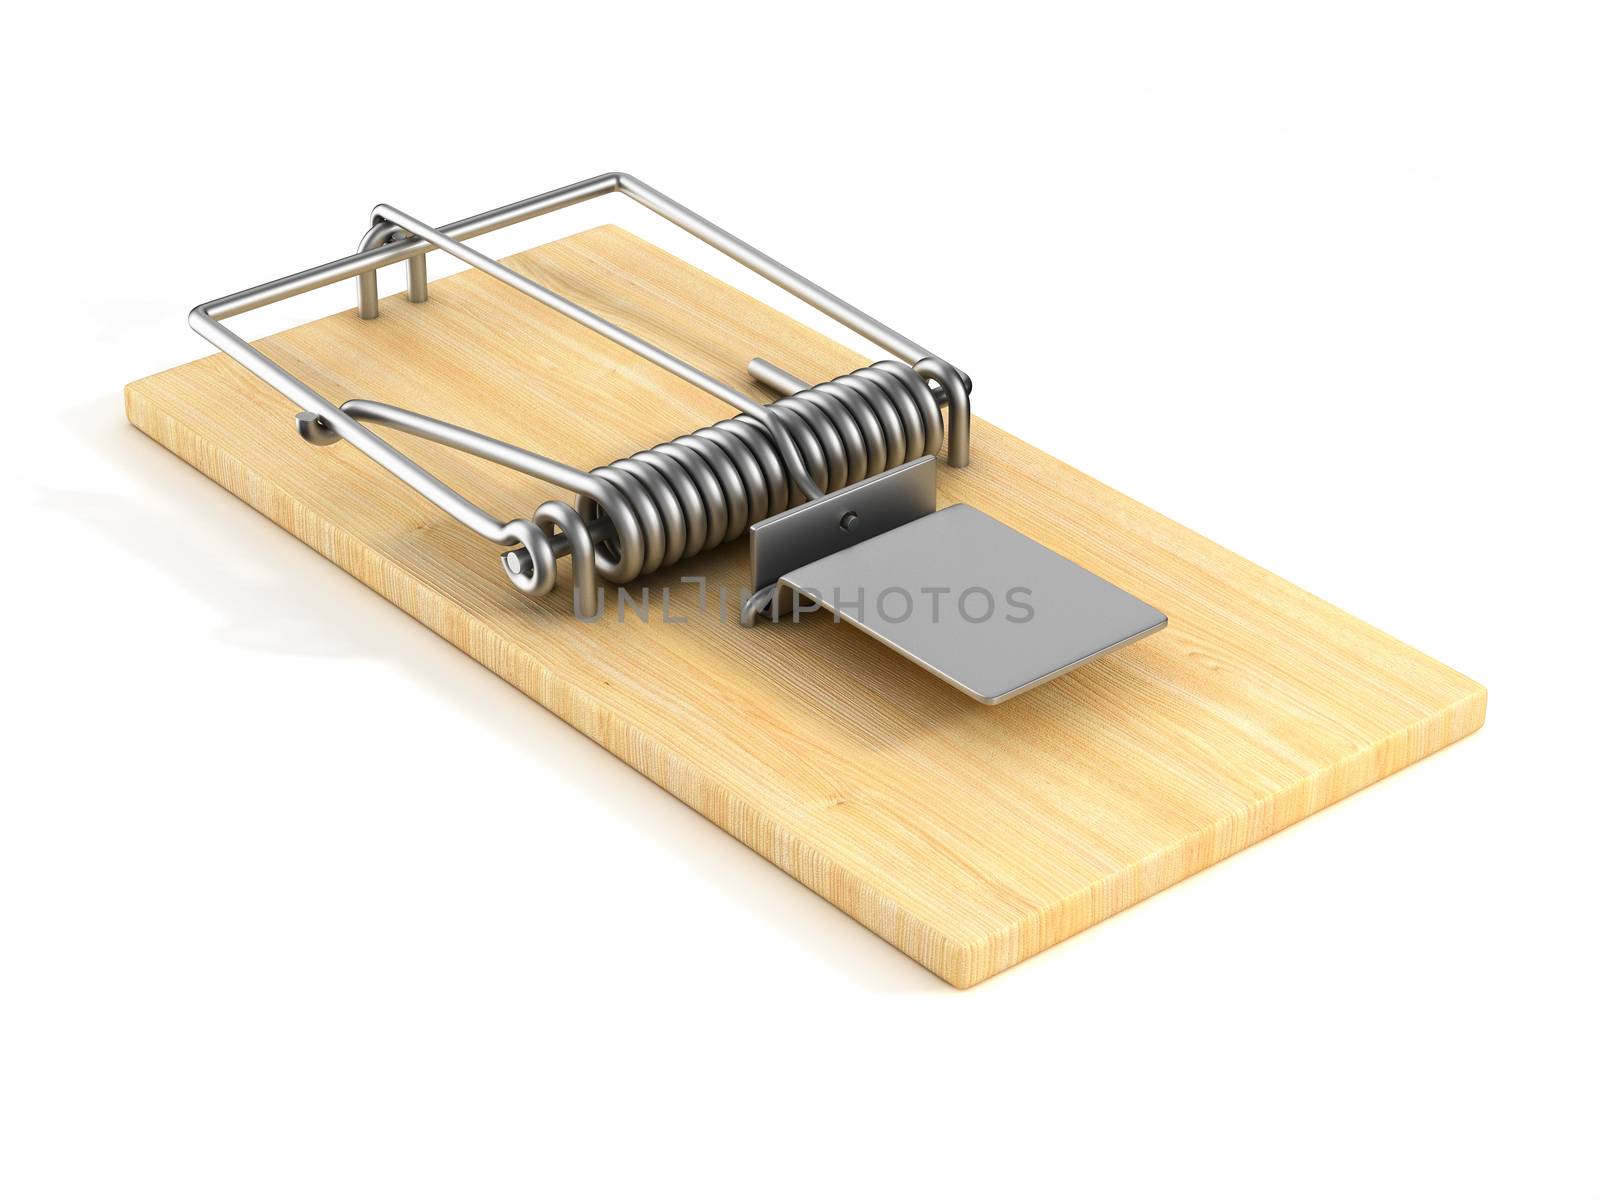 mousetrap on white background. Isolated 3D image by ISerg